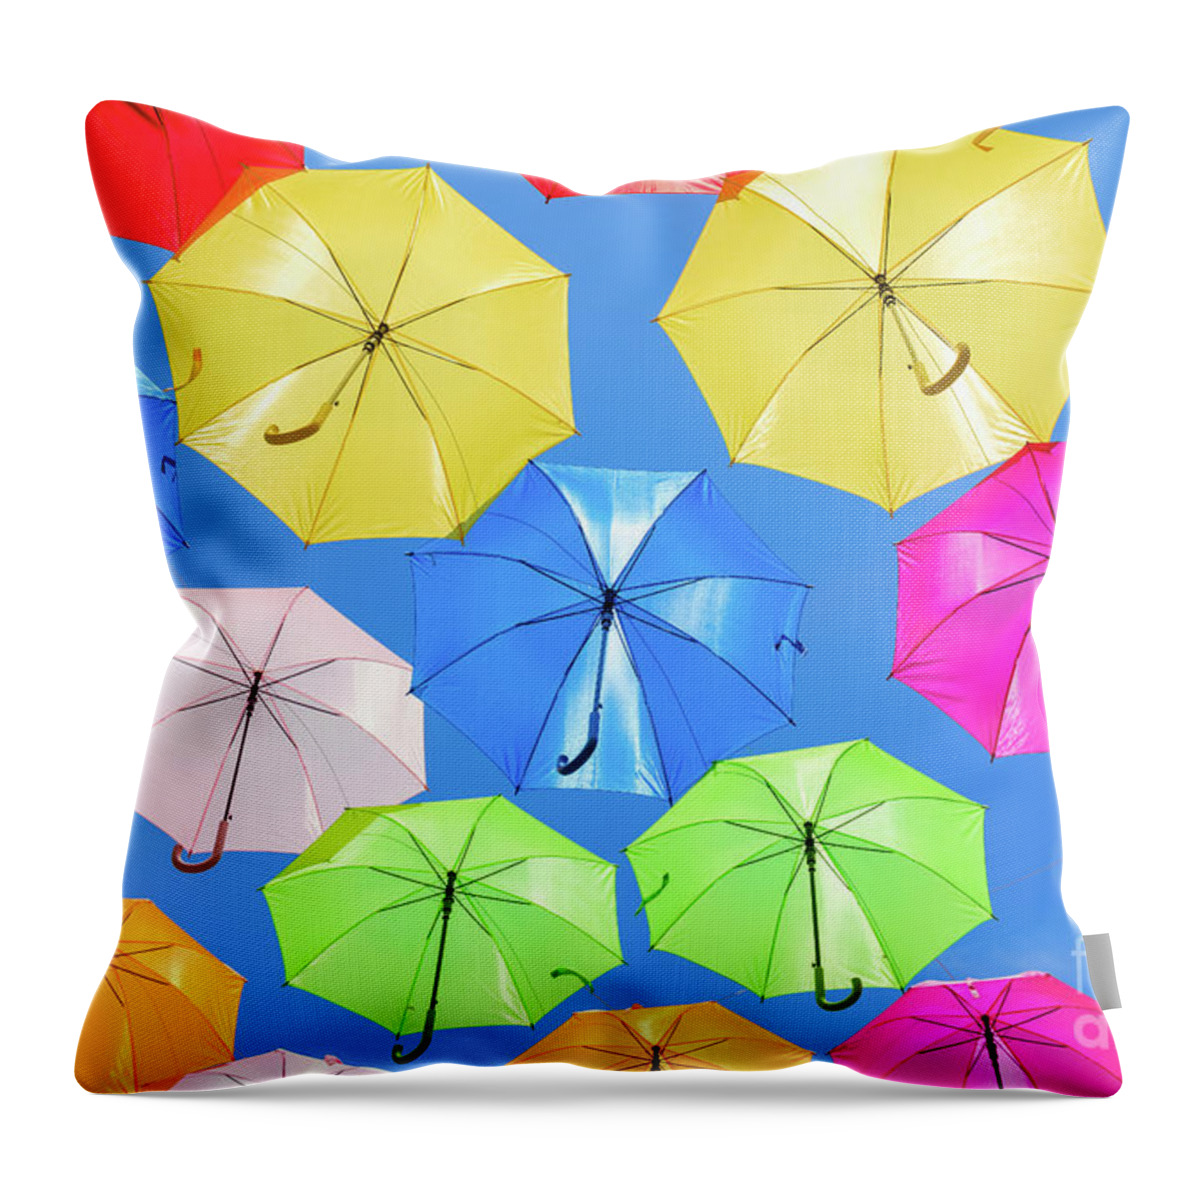 Umbrellas Throw Pillow featuring the photograph Colorful Umbrellas II by Raul Rodriguez